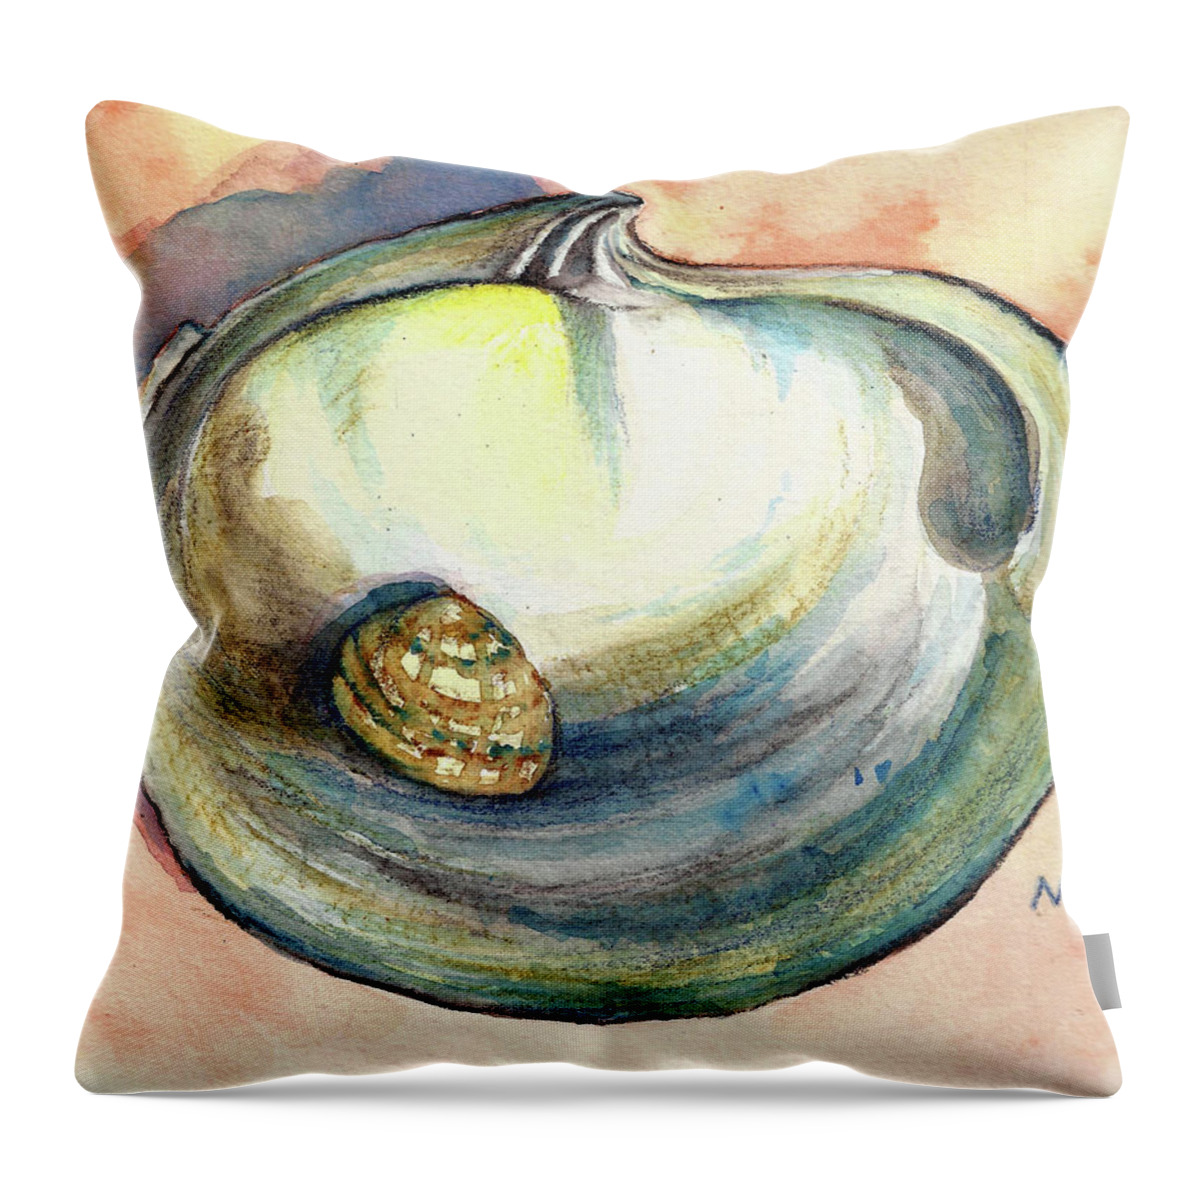 Shell Throw Pillow featuring the painting Shell Study by AnneMarie Welsh